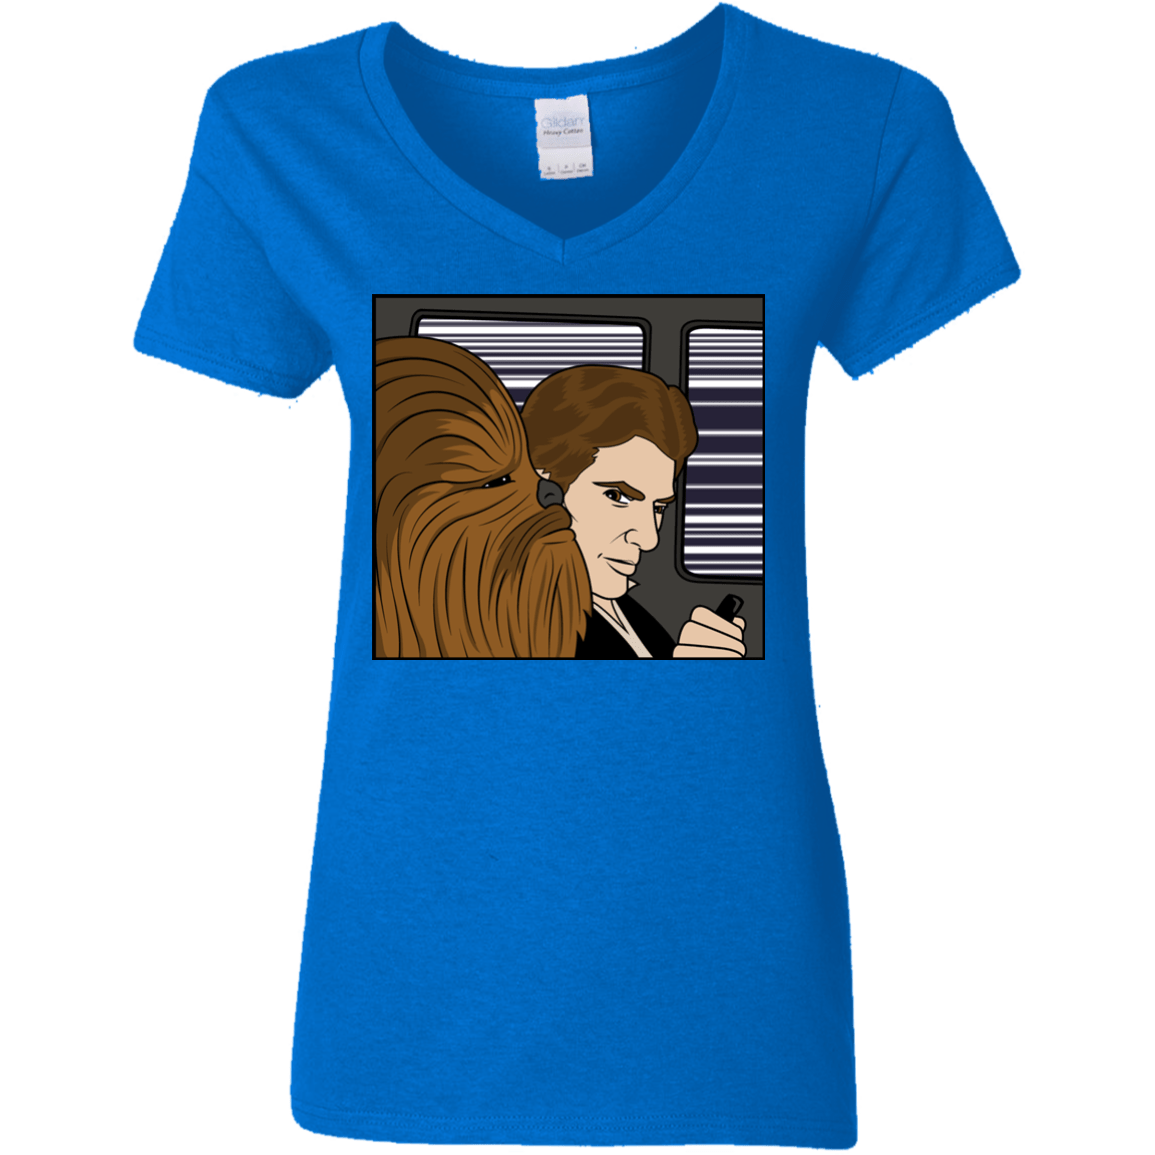 T-Shirts Royal / S In the Falcon! Women's V-Neck T-Shirt